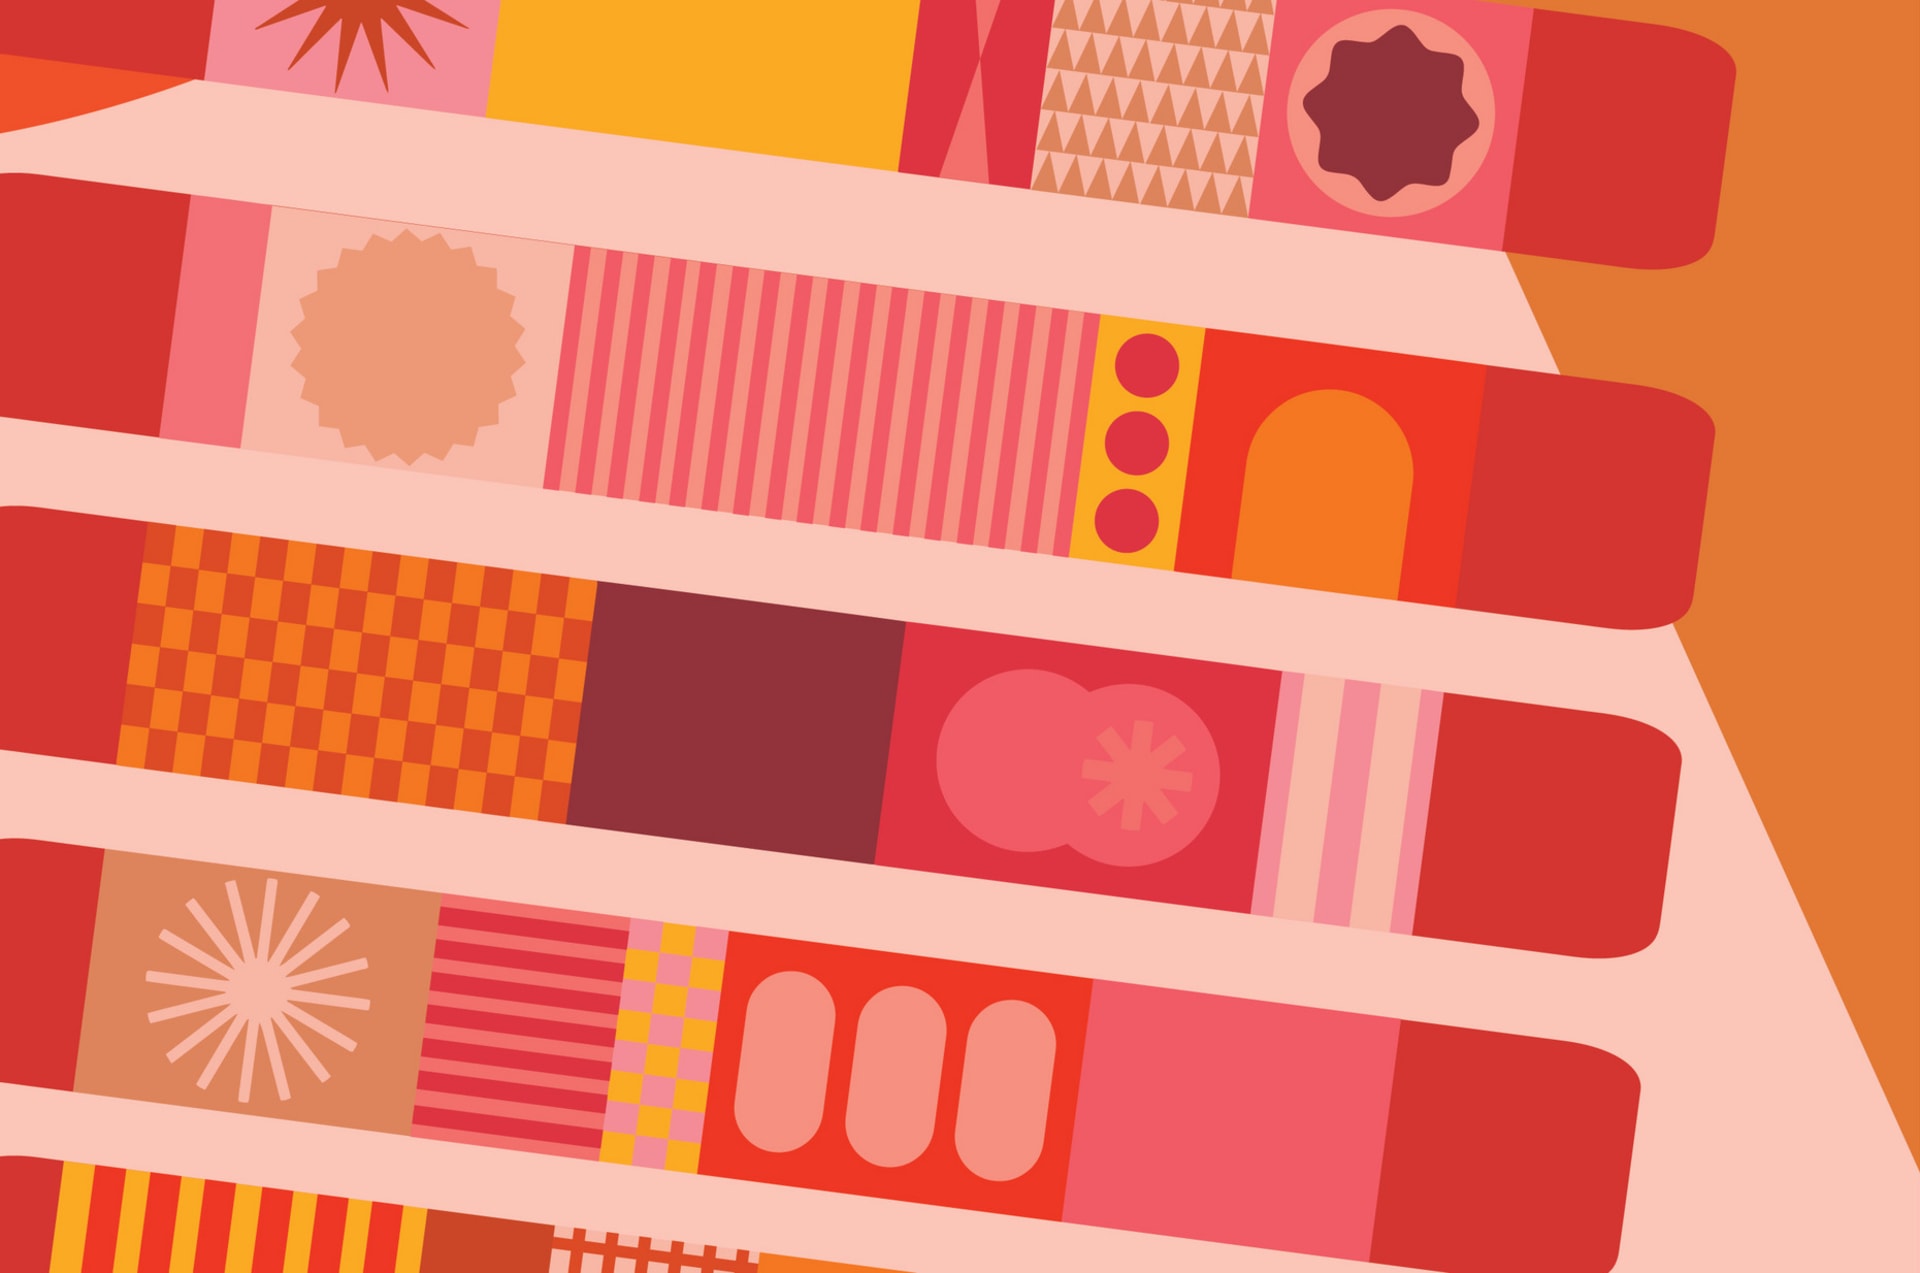 A digital design compromised of warm shades of pinks, oranges, browns and yellows. It is a combination of shapes and patterns.